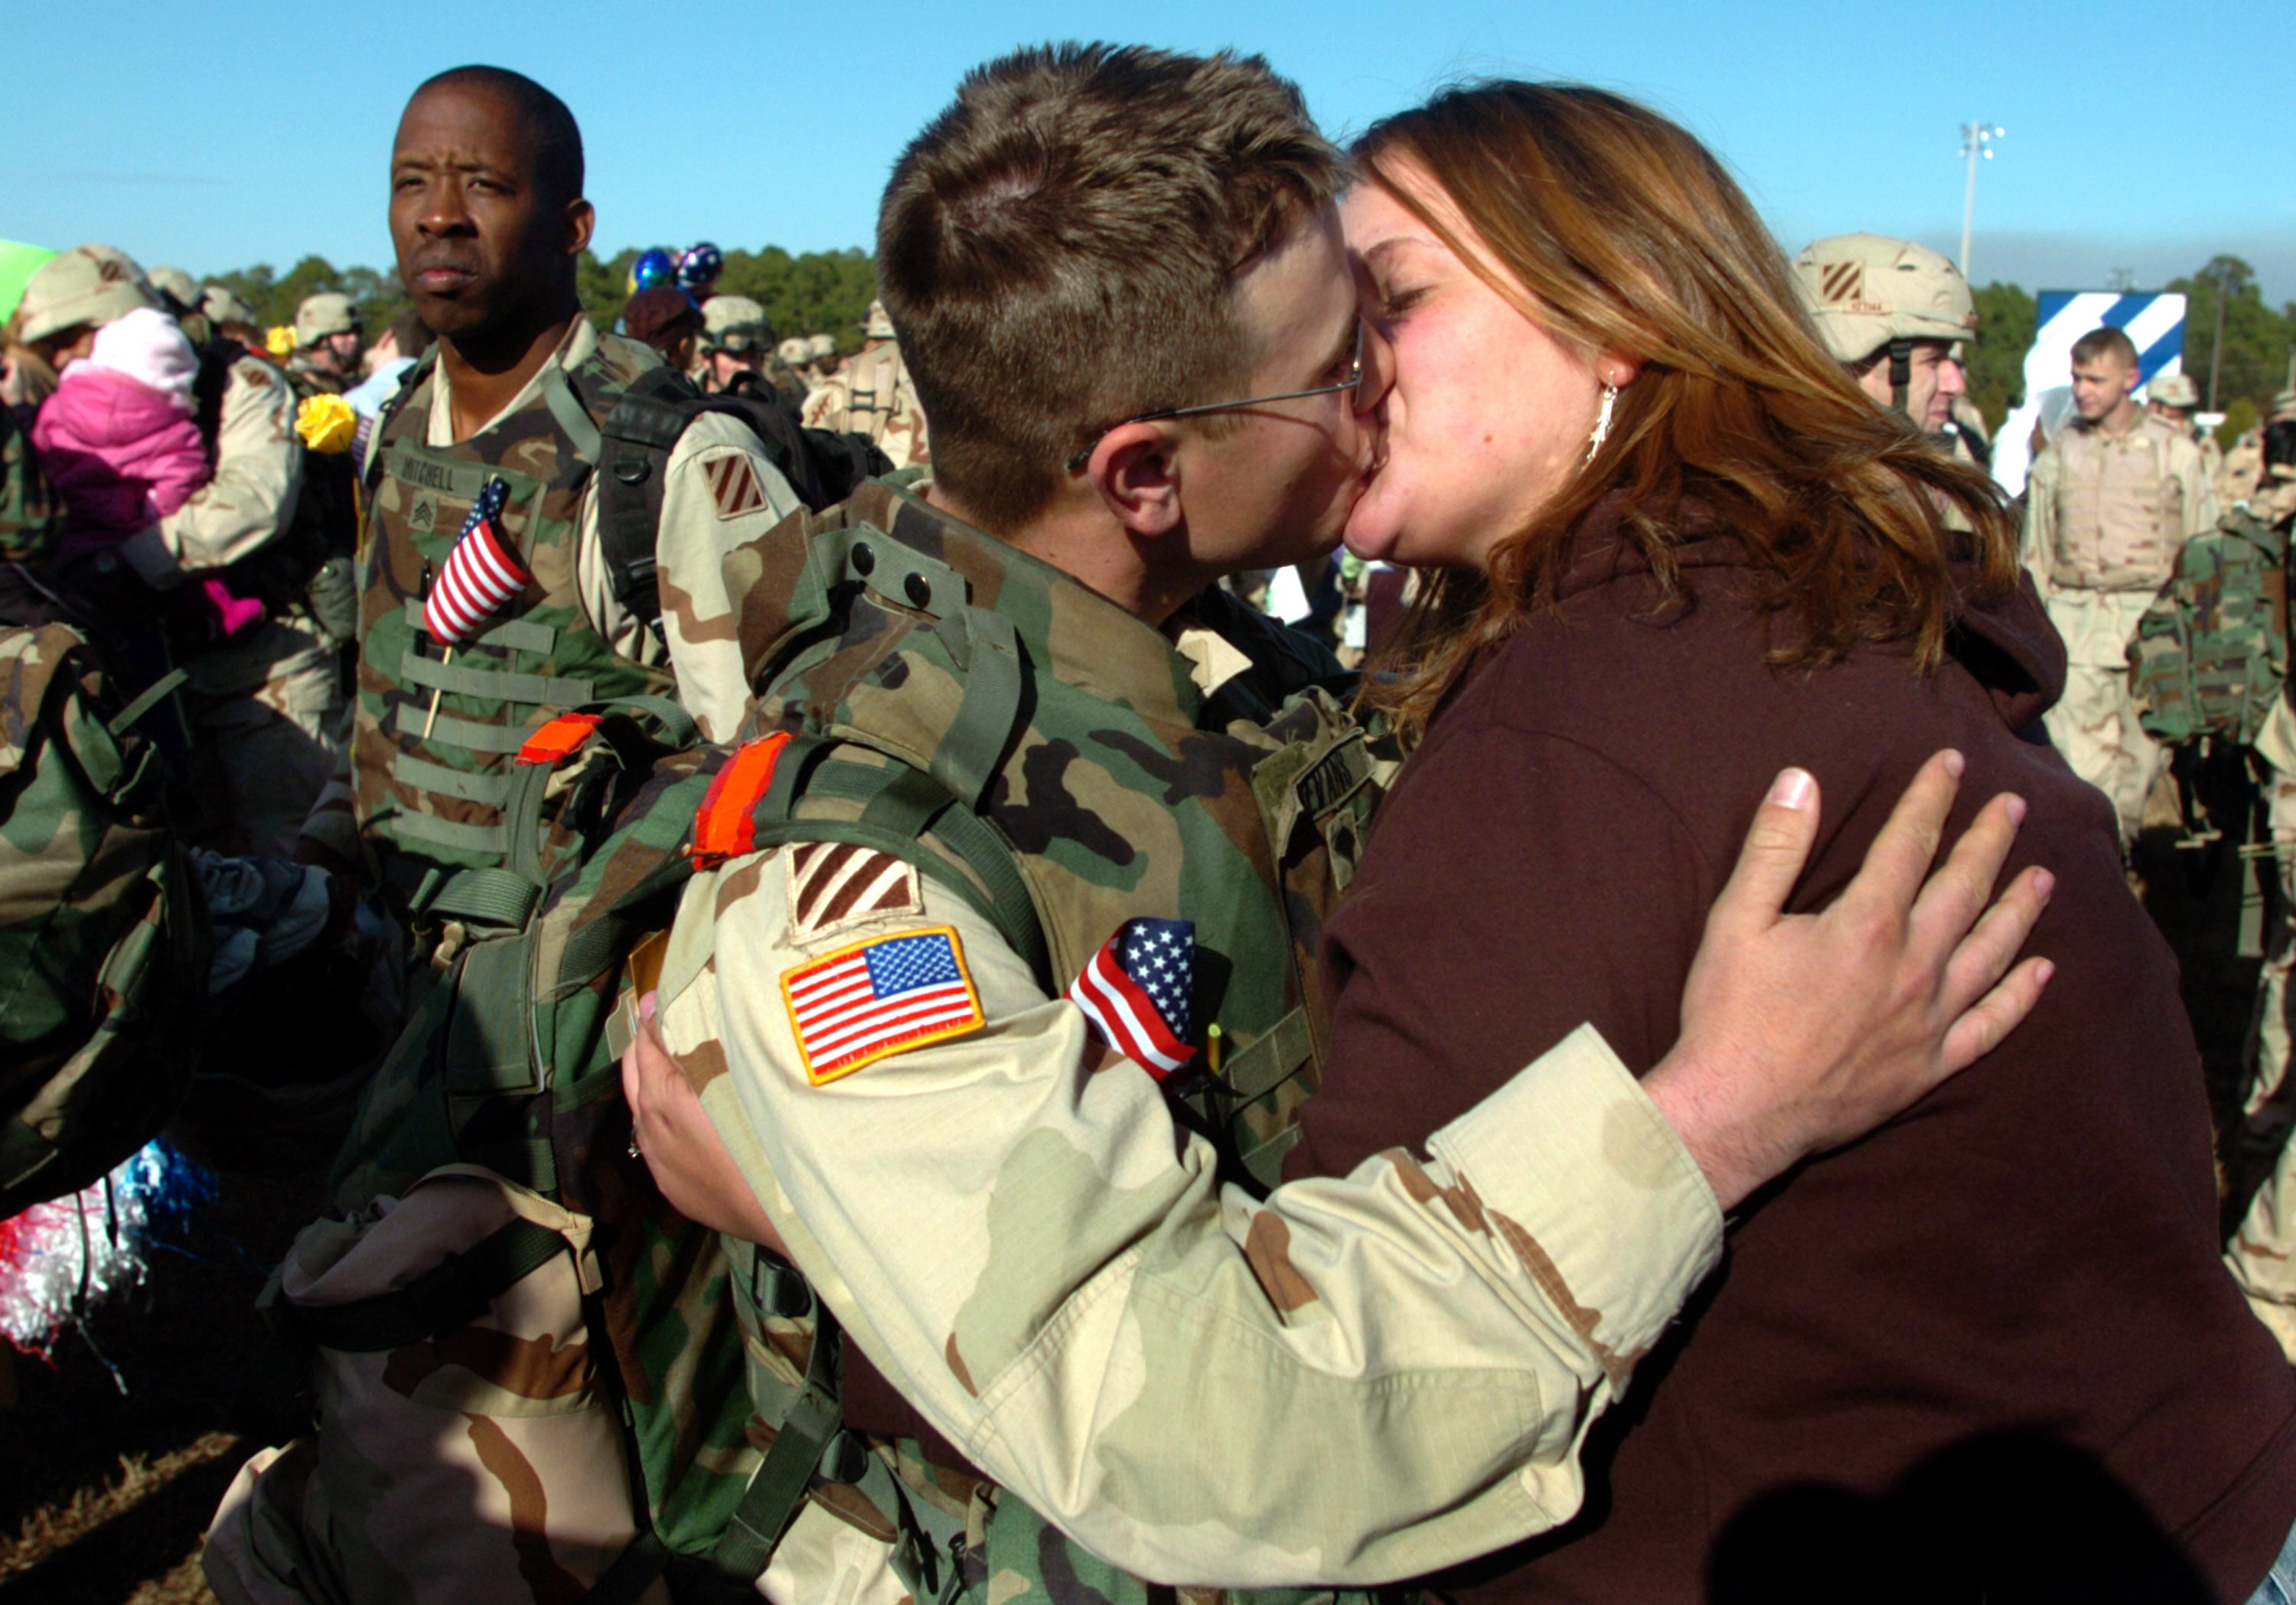 Army Girlfriend Makes Porn - Soldier Homecoming Kissing Pictures | POPSUGAR Love & Sex